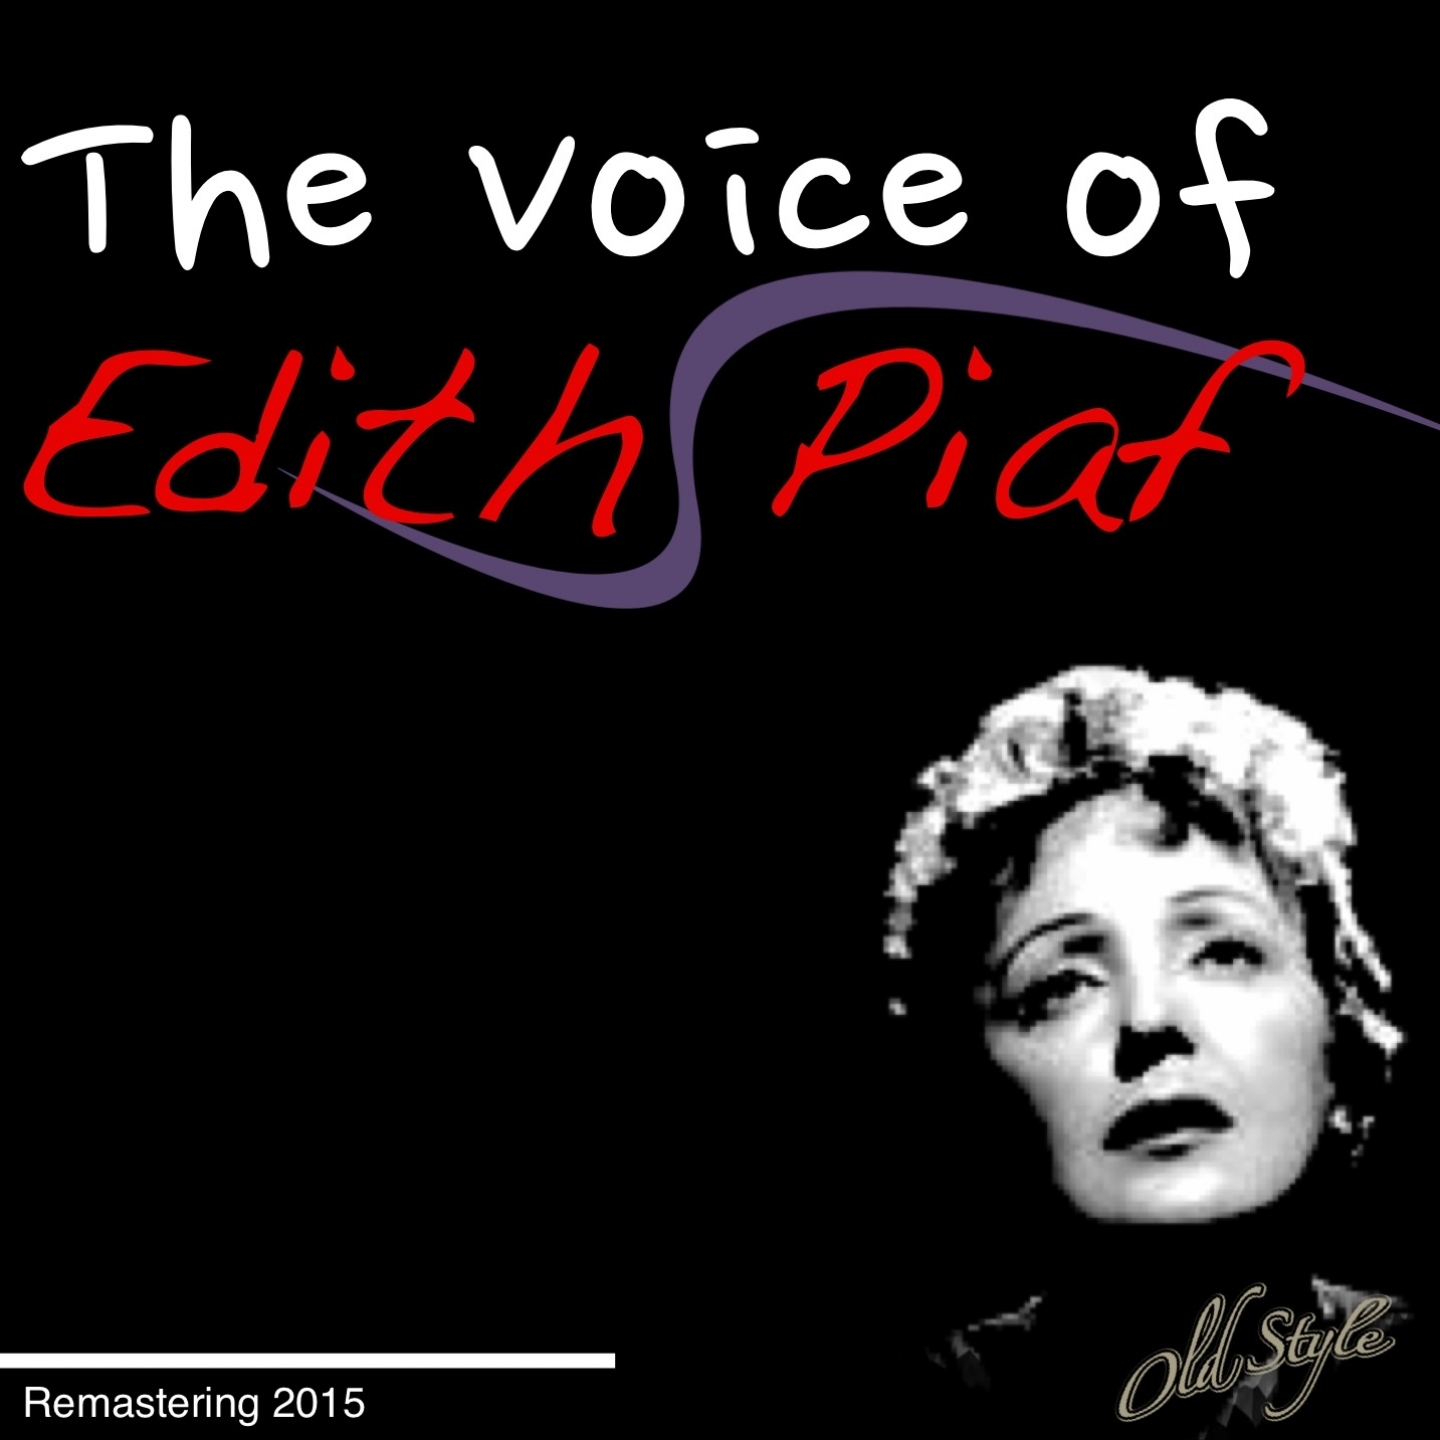 The Voice Of Edith Piaf